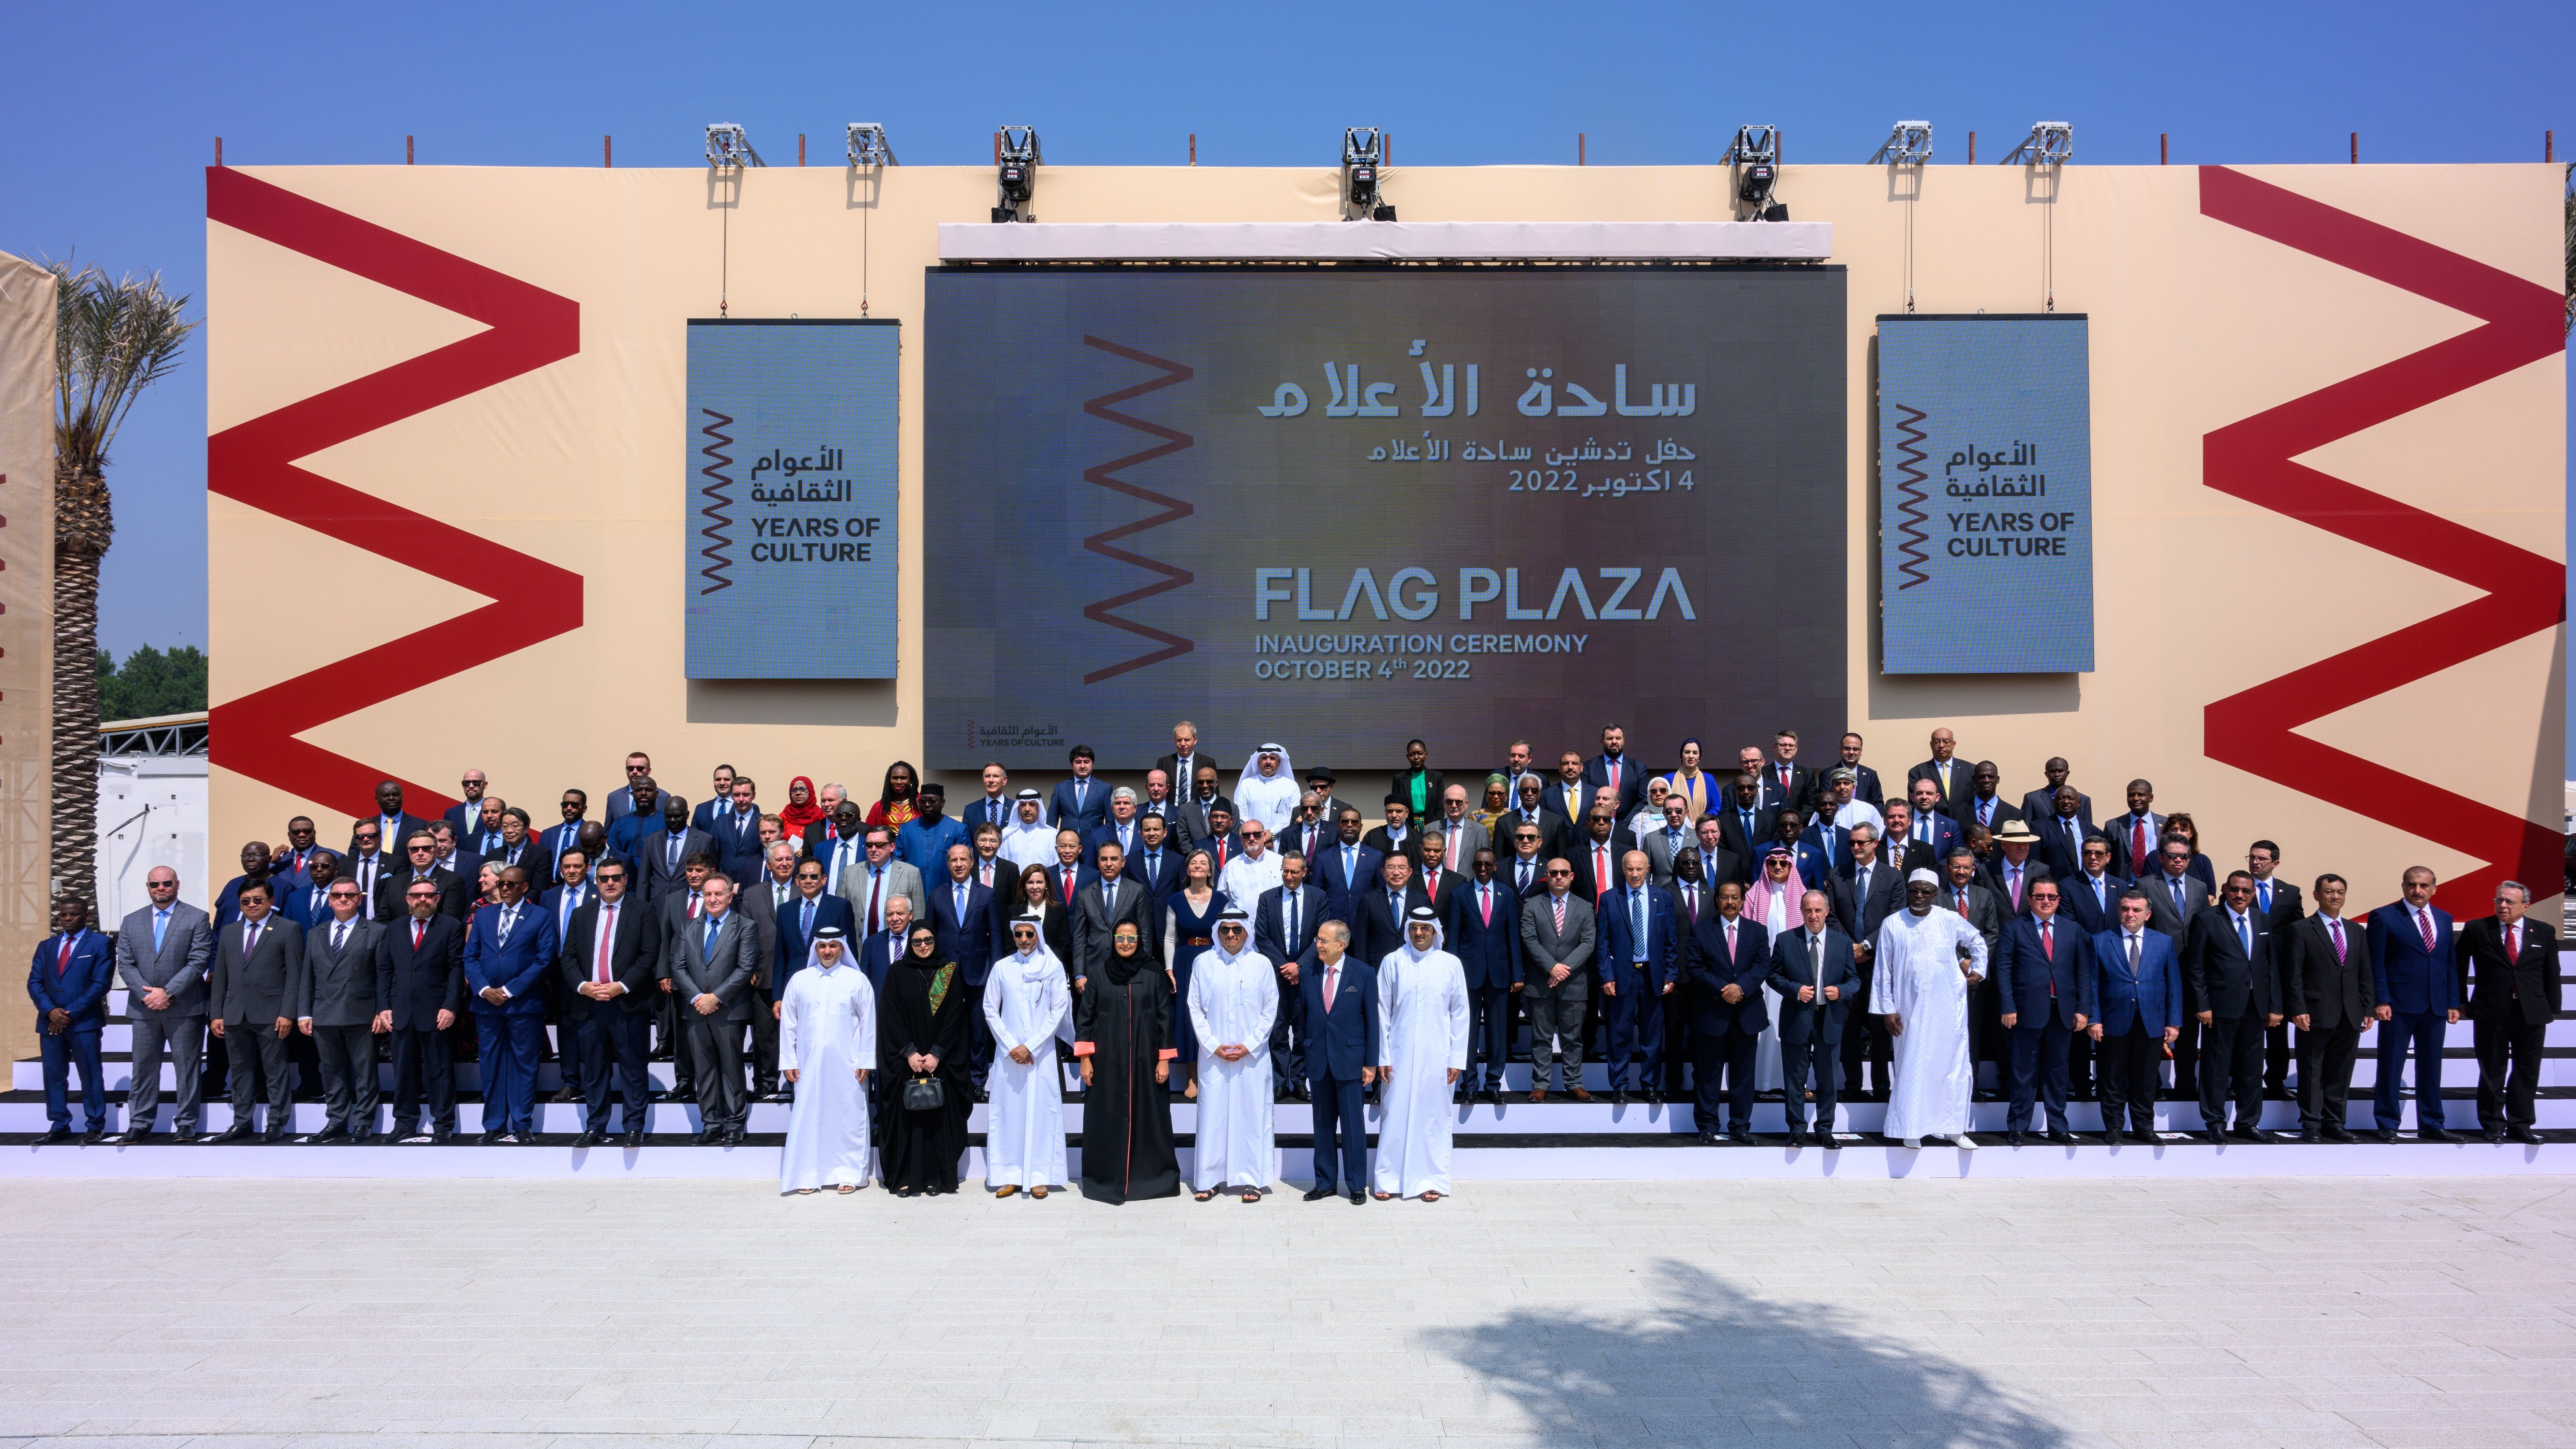 Over 100 important officials and guests standing against a Years of Culture backdrop at the Flag Plaza inauguration in Doha.